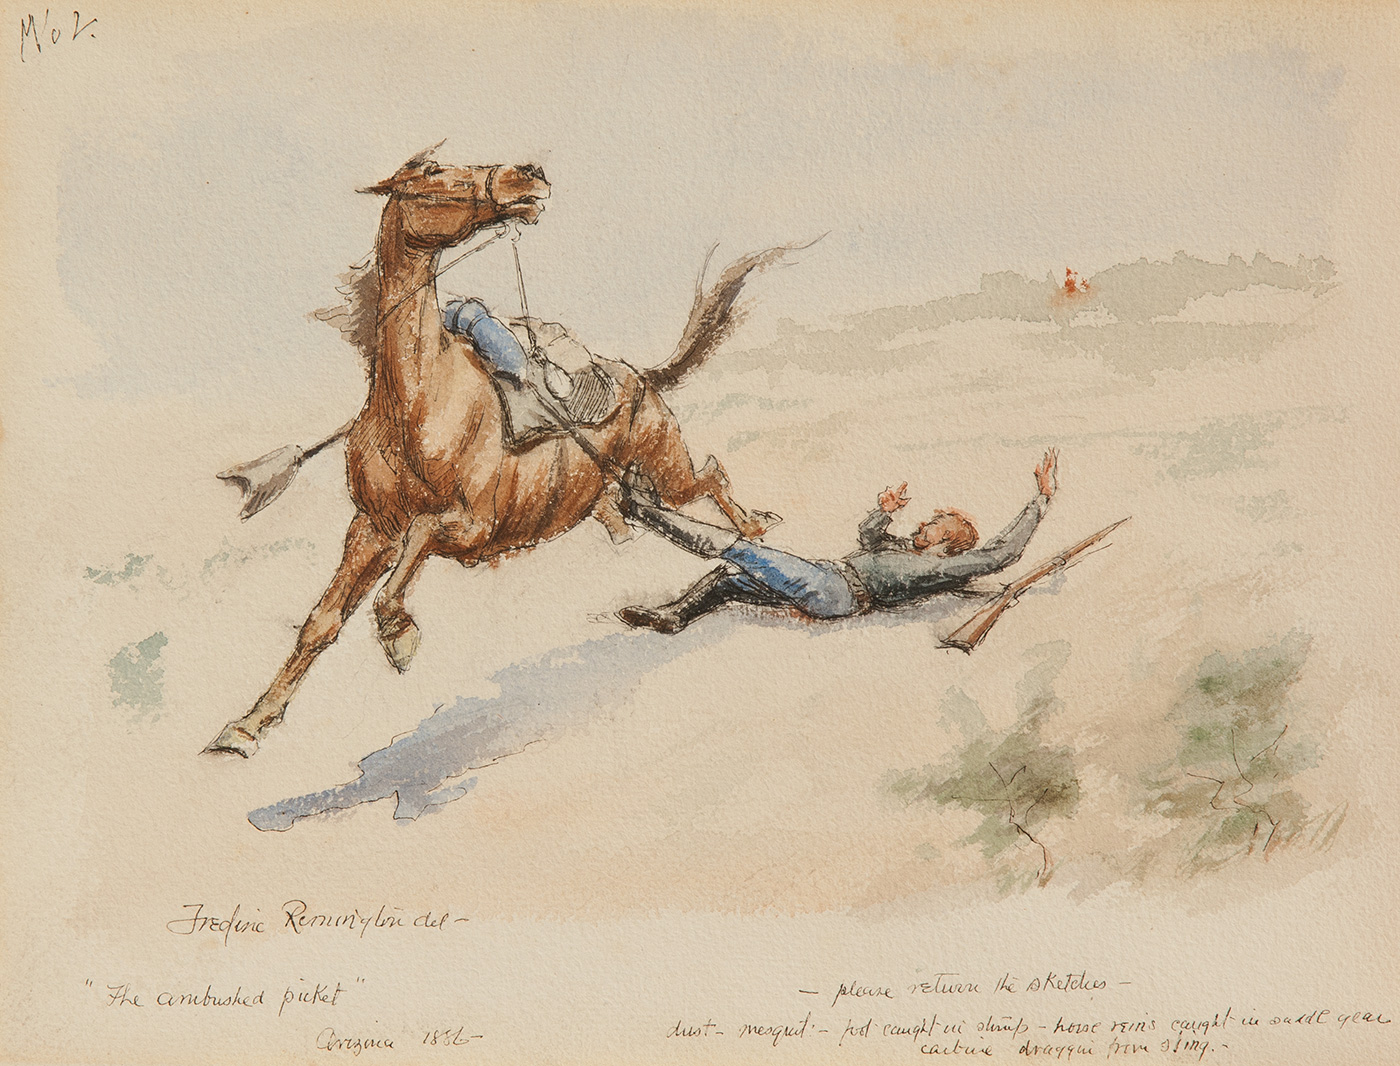 A man has fallen off his moving horse with his foot caught in his stirrup.